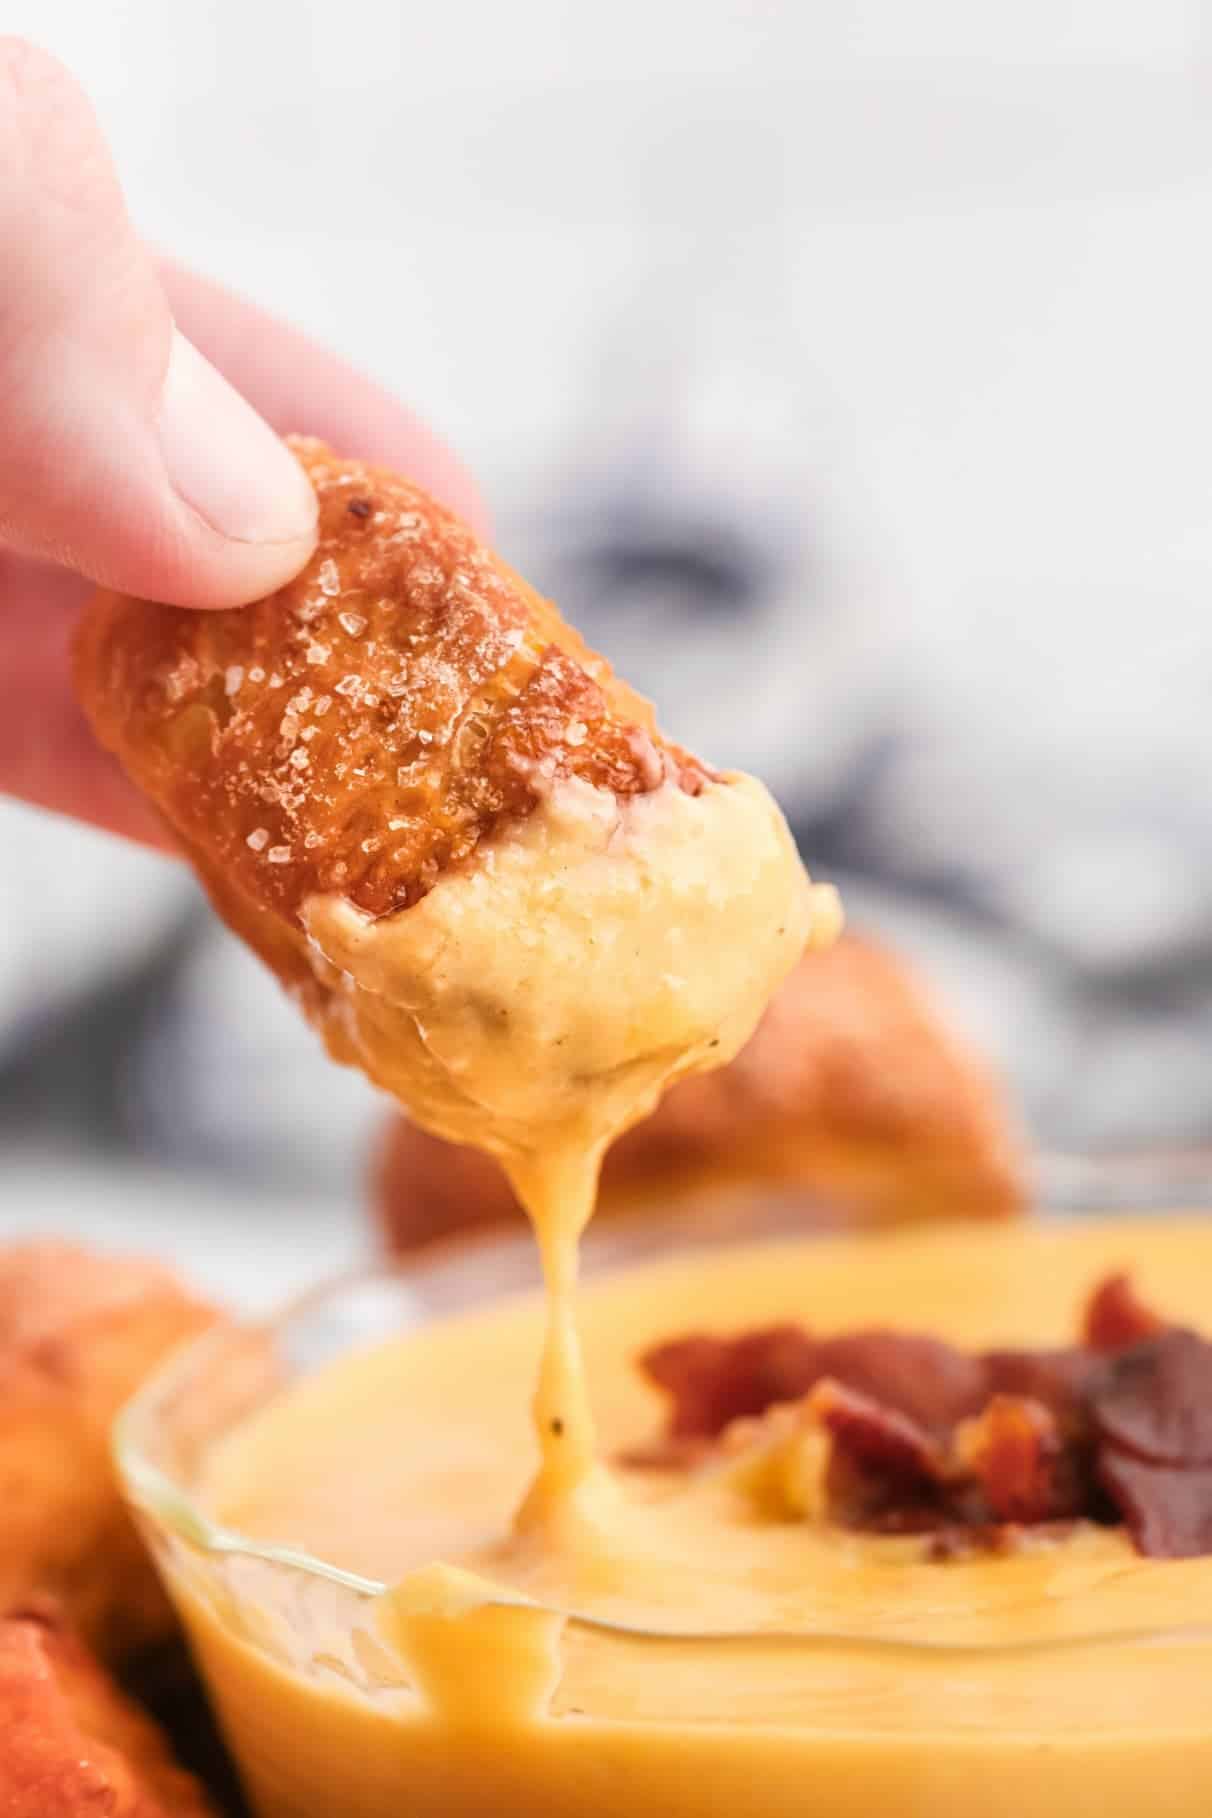 A pretzel bite being dipped in beer cheese sauce.